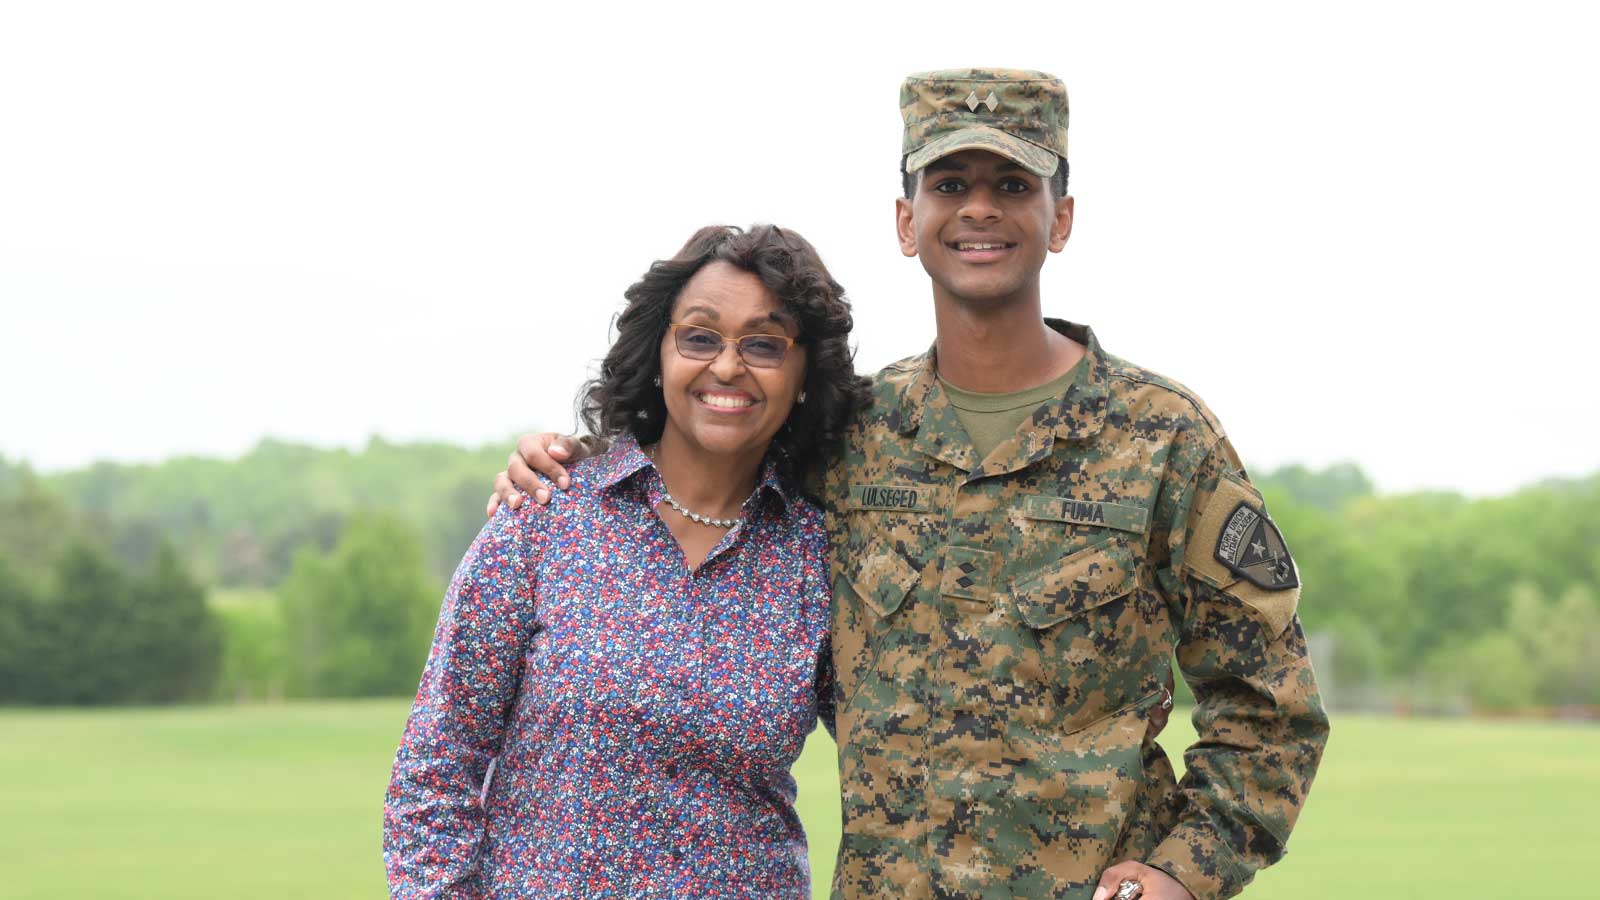 Cadet and his mother